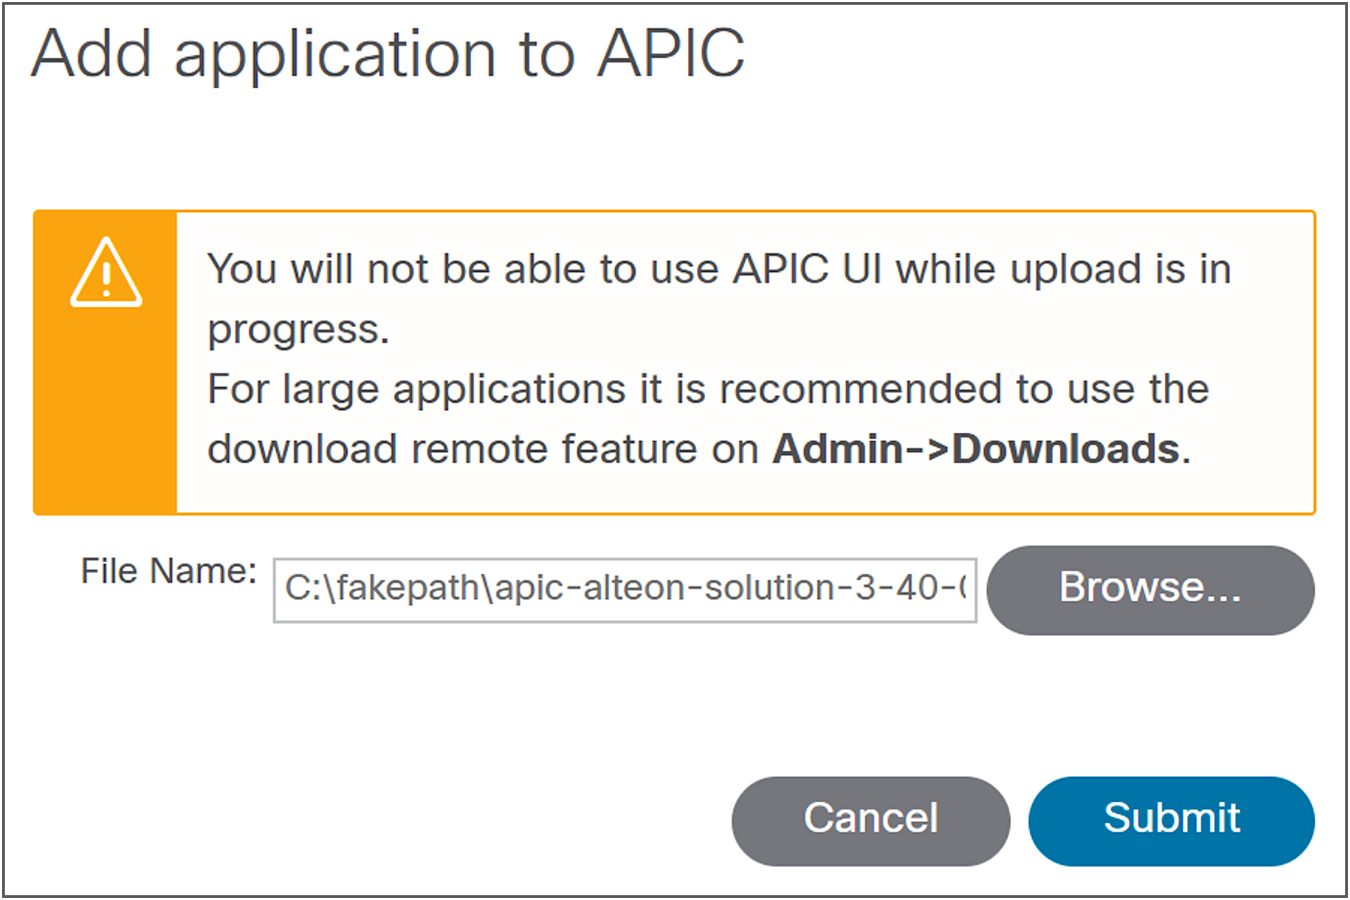 Select Browse and select the ACI application package that was downloaded previously